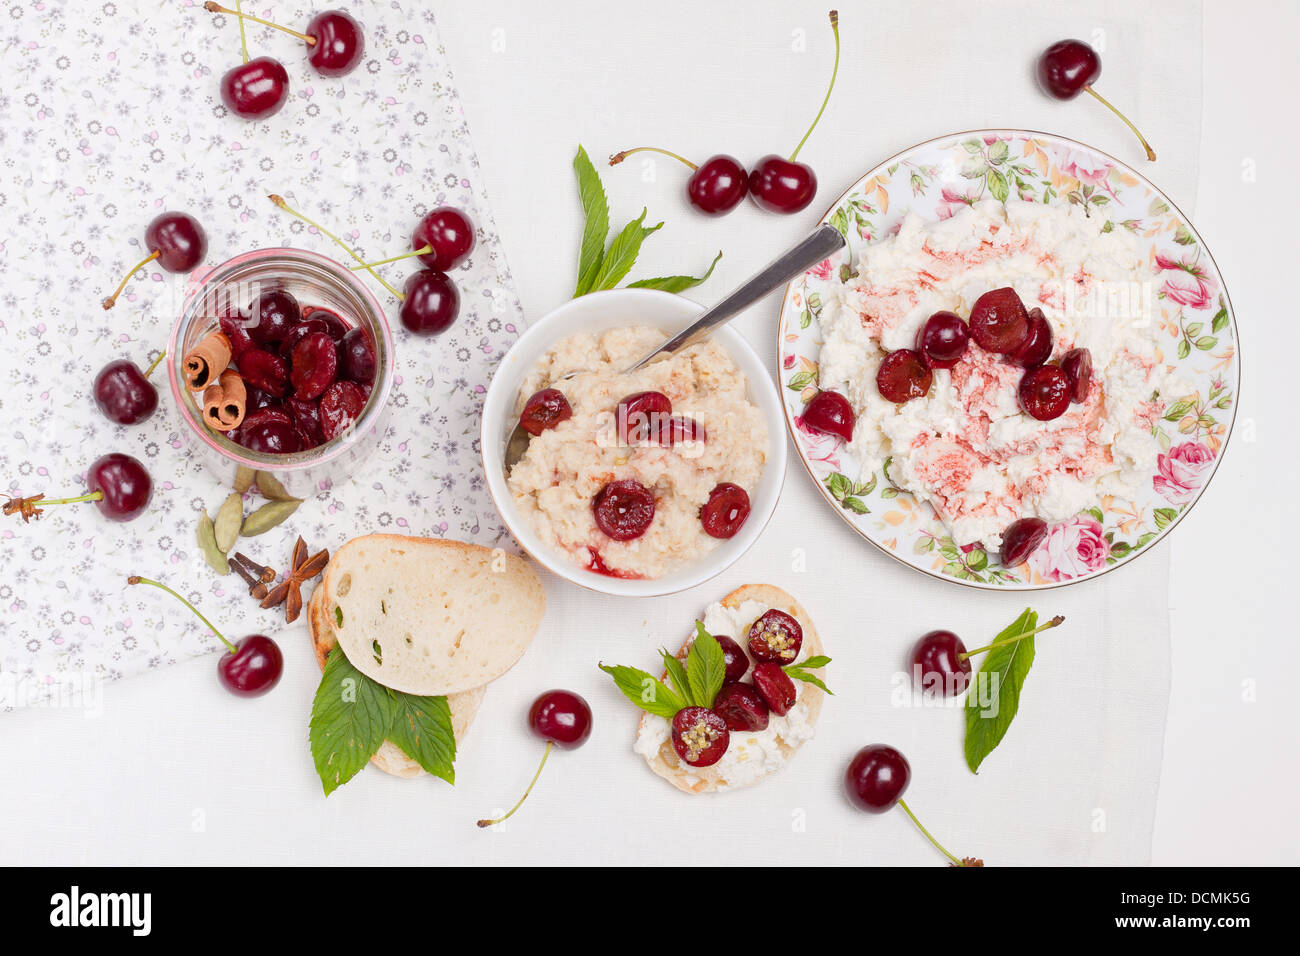 Breakfast dishes garnished with chopped cherries and mint leaves Stock Photo